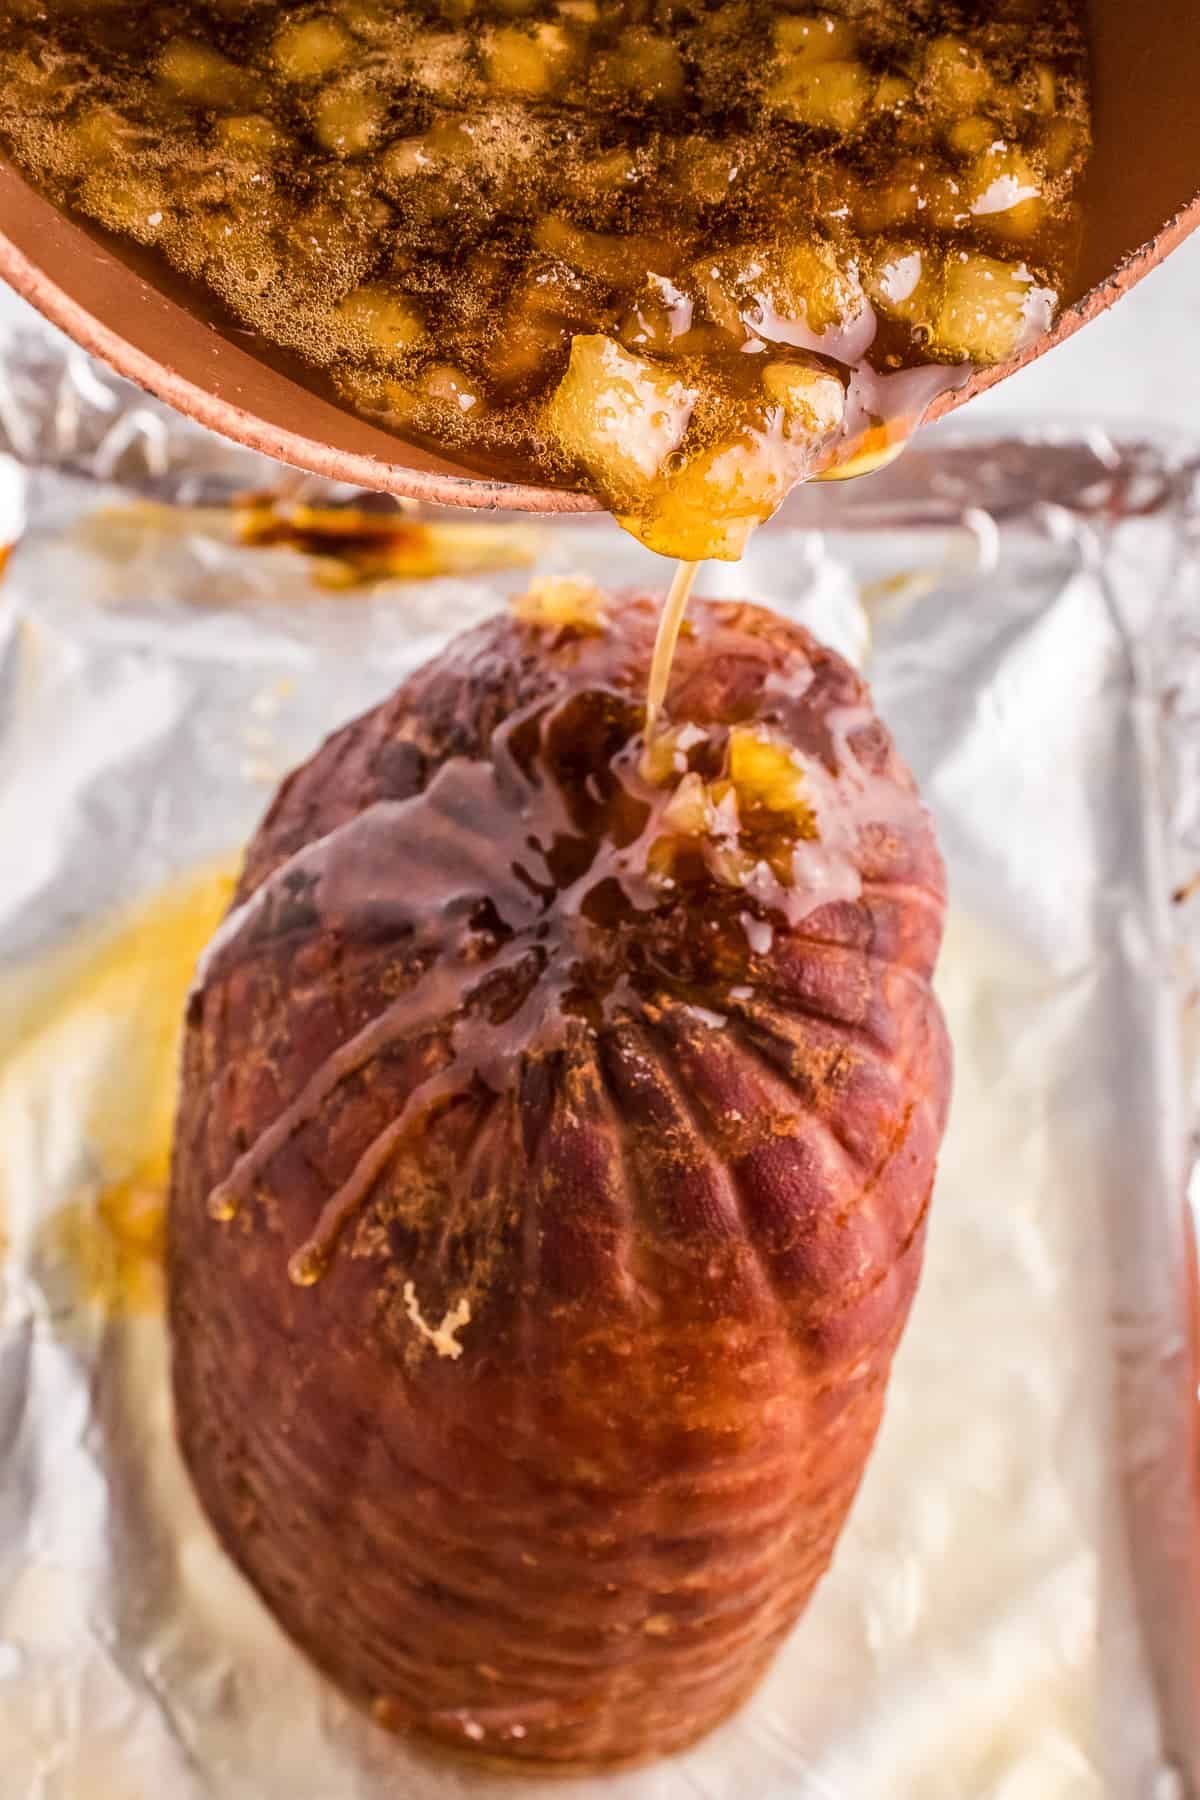 Pouring pineapple glaze of baked ham